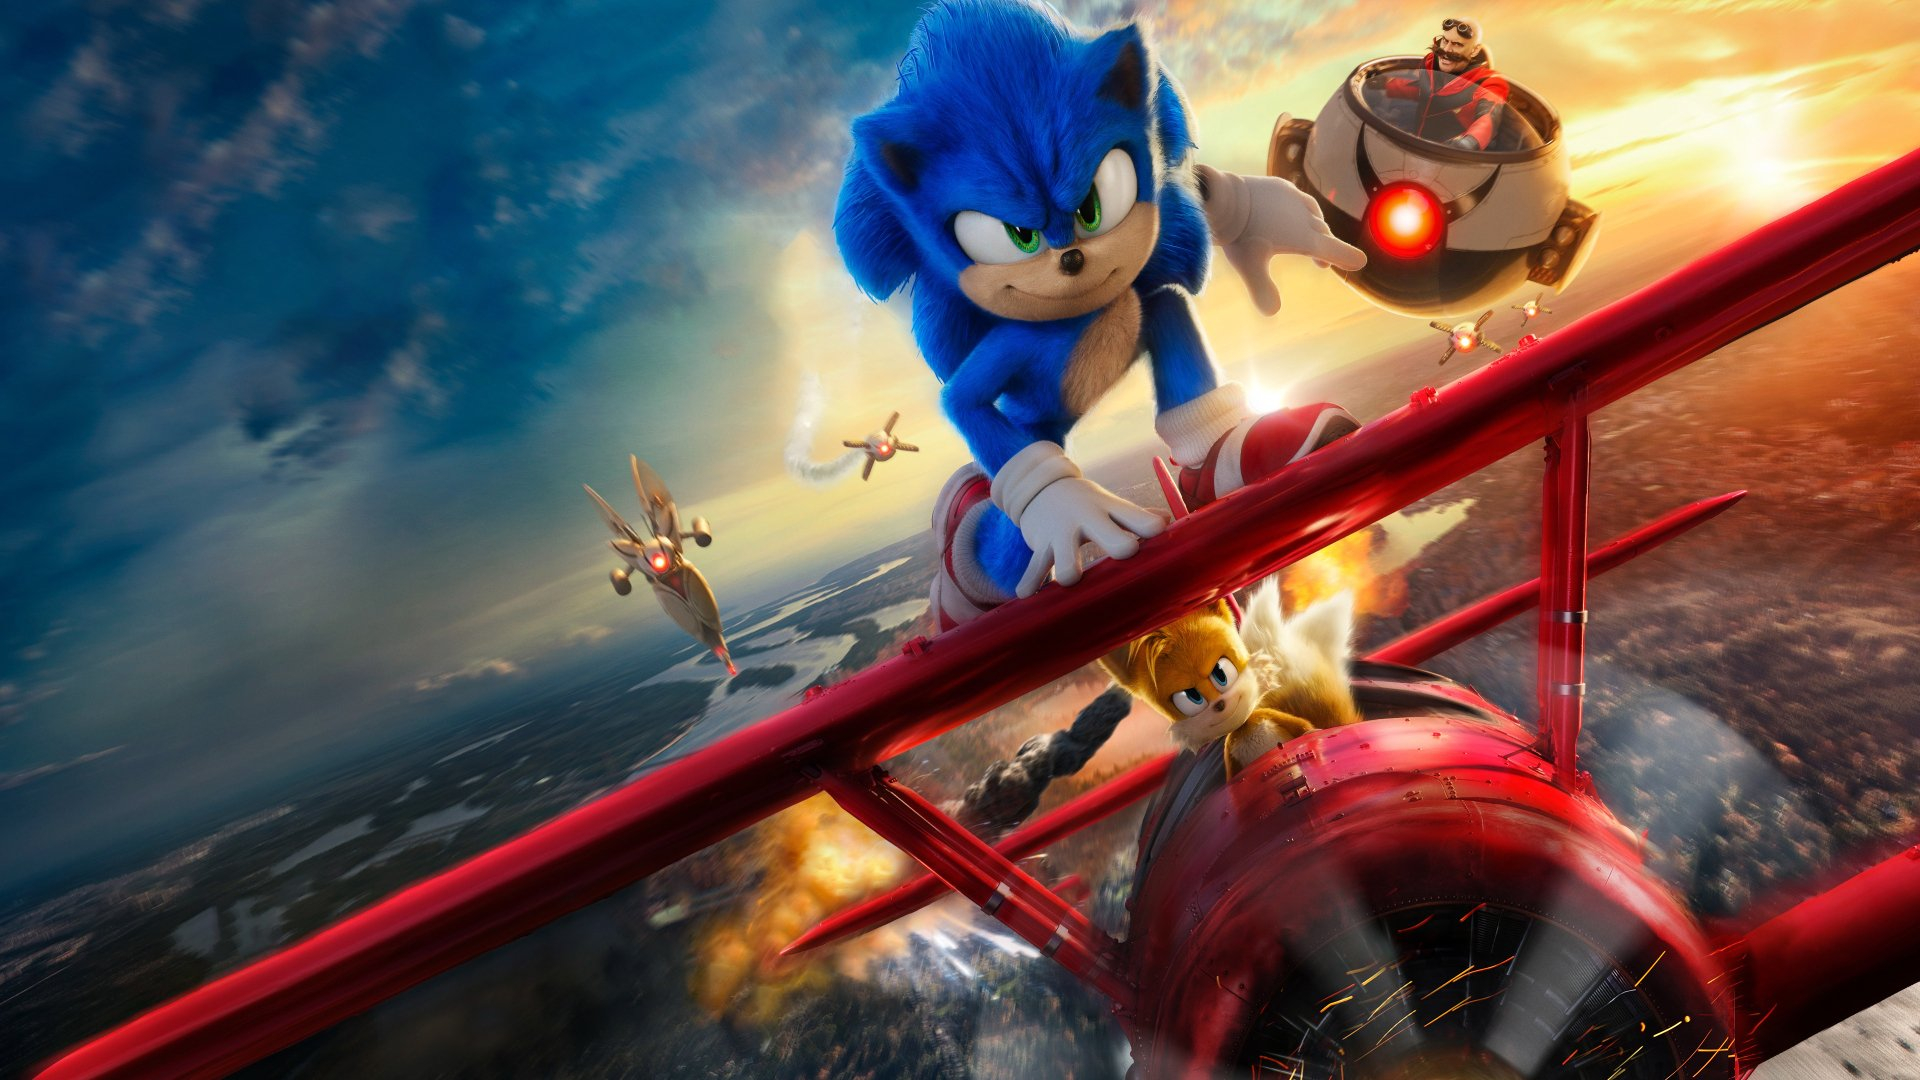 1920x1080 30+ Sonic the Hedgehog 2 HD Wallpapers and Backgrounds